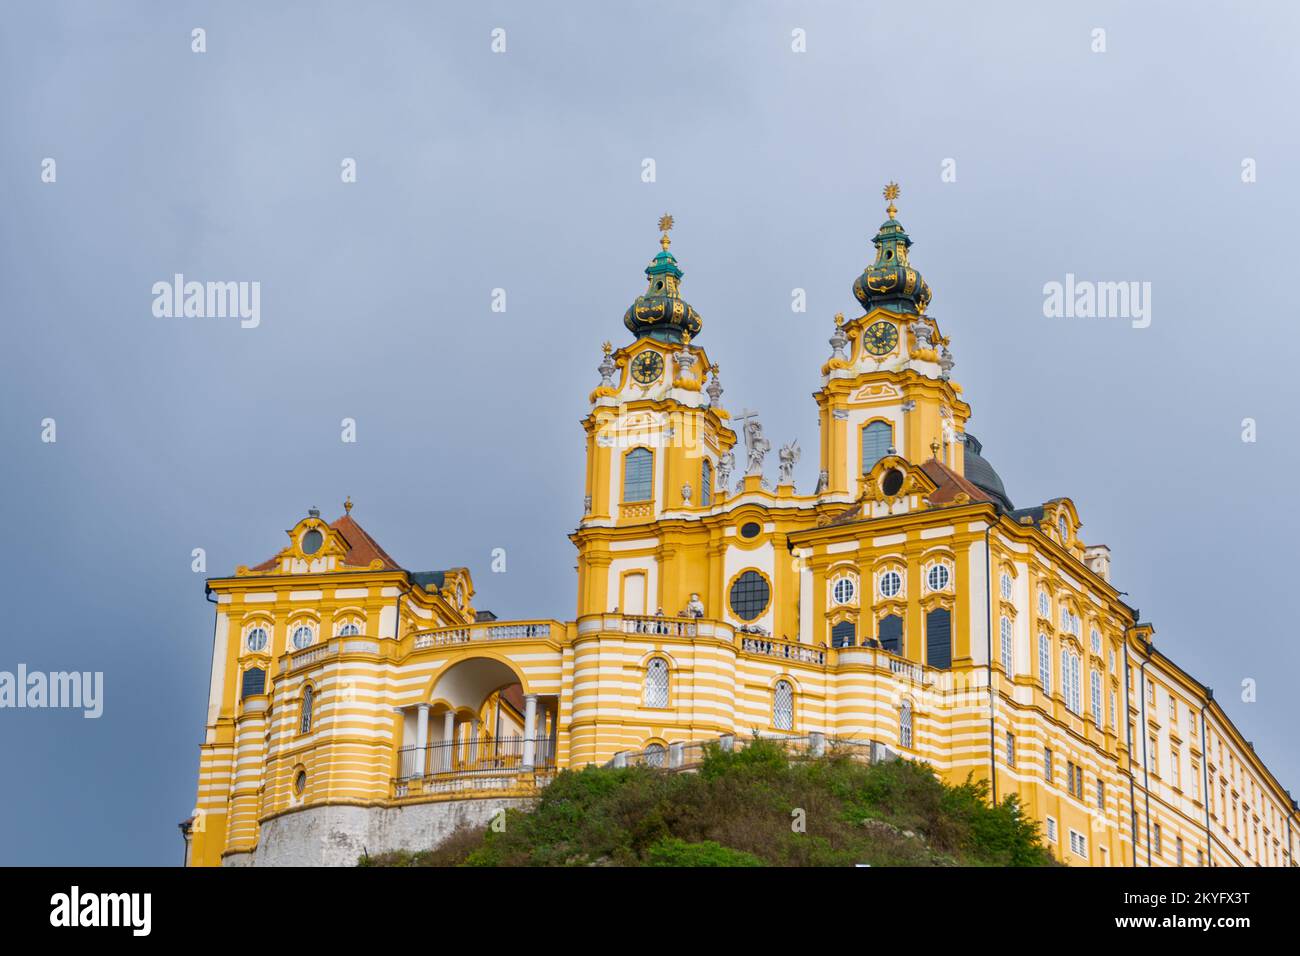 Melk, Austria - 22 September, 2022:the historic Melk Abbey and church spires on the rocky promontory above the Danube River Stock Photo